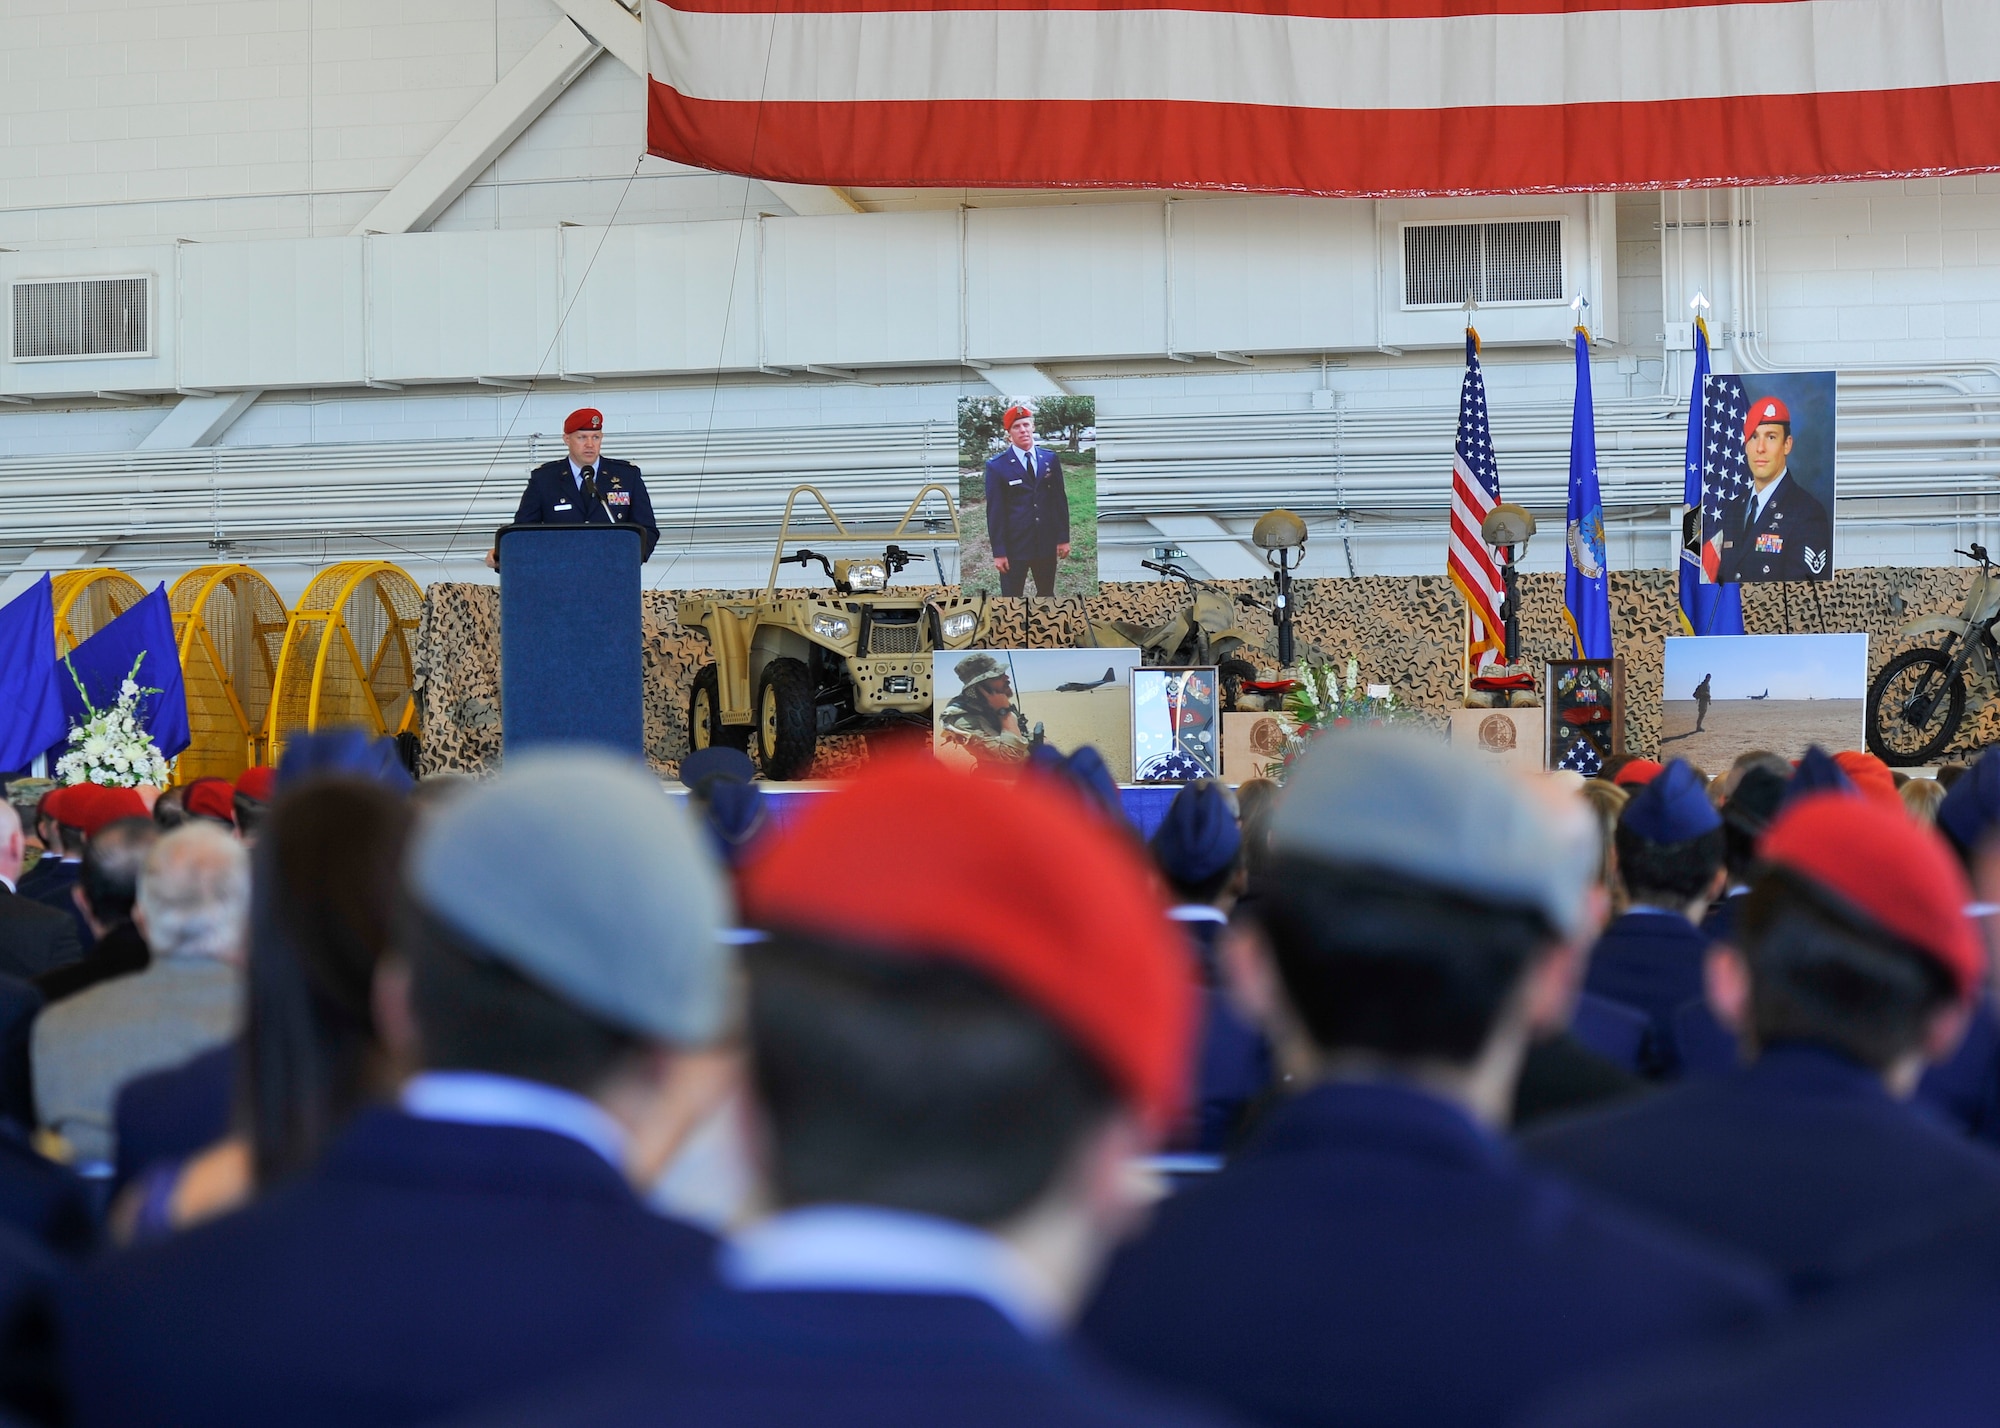 Lt. Col. Paul Brister, 23rd Special Tactics Squadron commander, speaks at the memorial service for Capt. Matthew D. Roland and Staff Sgt. Forrest B. Sibley on Hurlburt Field, Fla., Sept. 14, 2015. The two Special Tactics Airmen, who had recently deployed to Afghanistan in support of Operation Freedom's Sentinel, were shot at a vehicle checkpoint at Camp Antonik, Afghanistan, Aug. 26, and died of wounds sustained in the attack, were honored in a private memorial. Both Special Tactics Airmen will be buried with full military honors. (U.S. Air Force photo by Airman Kai White/Released)